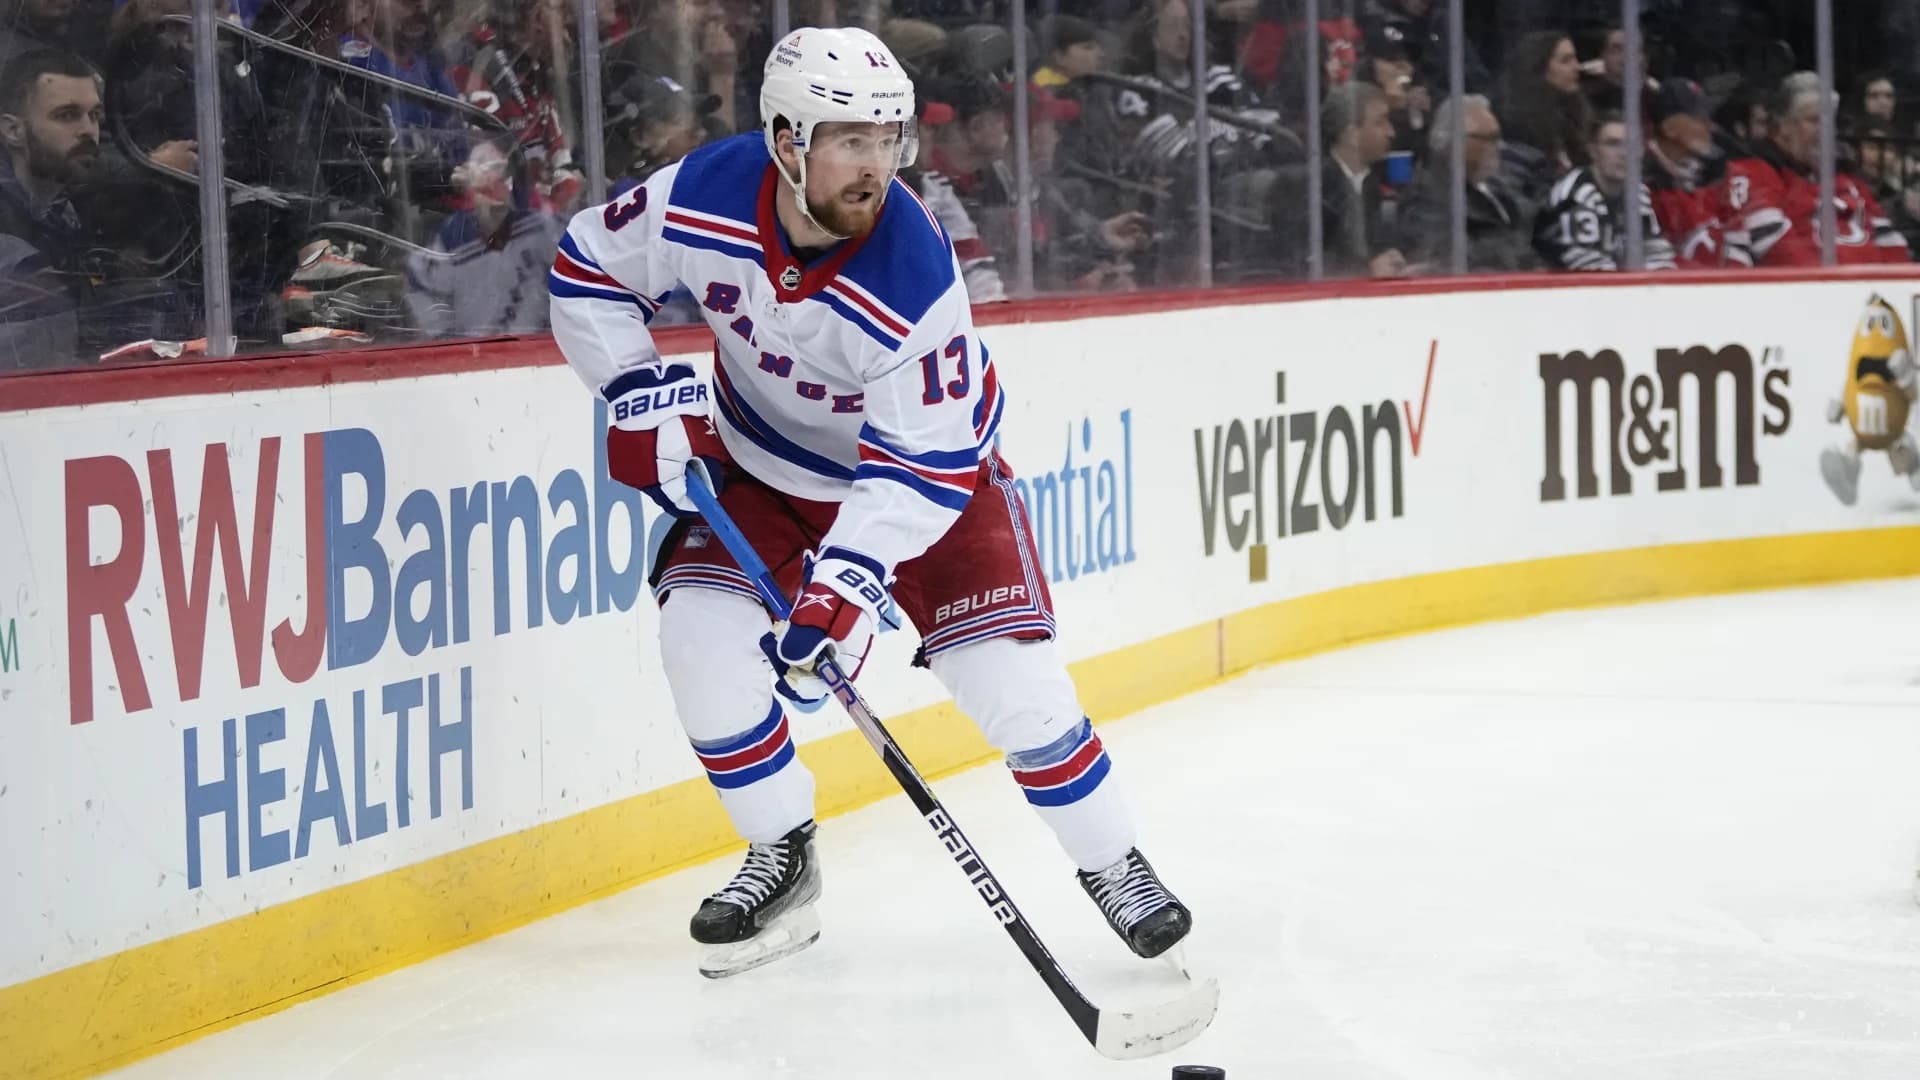 Rangers sign Alexis Lafrenière to a 2-year contract worth $4.65 million